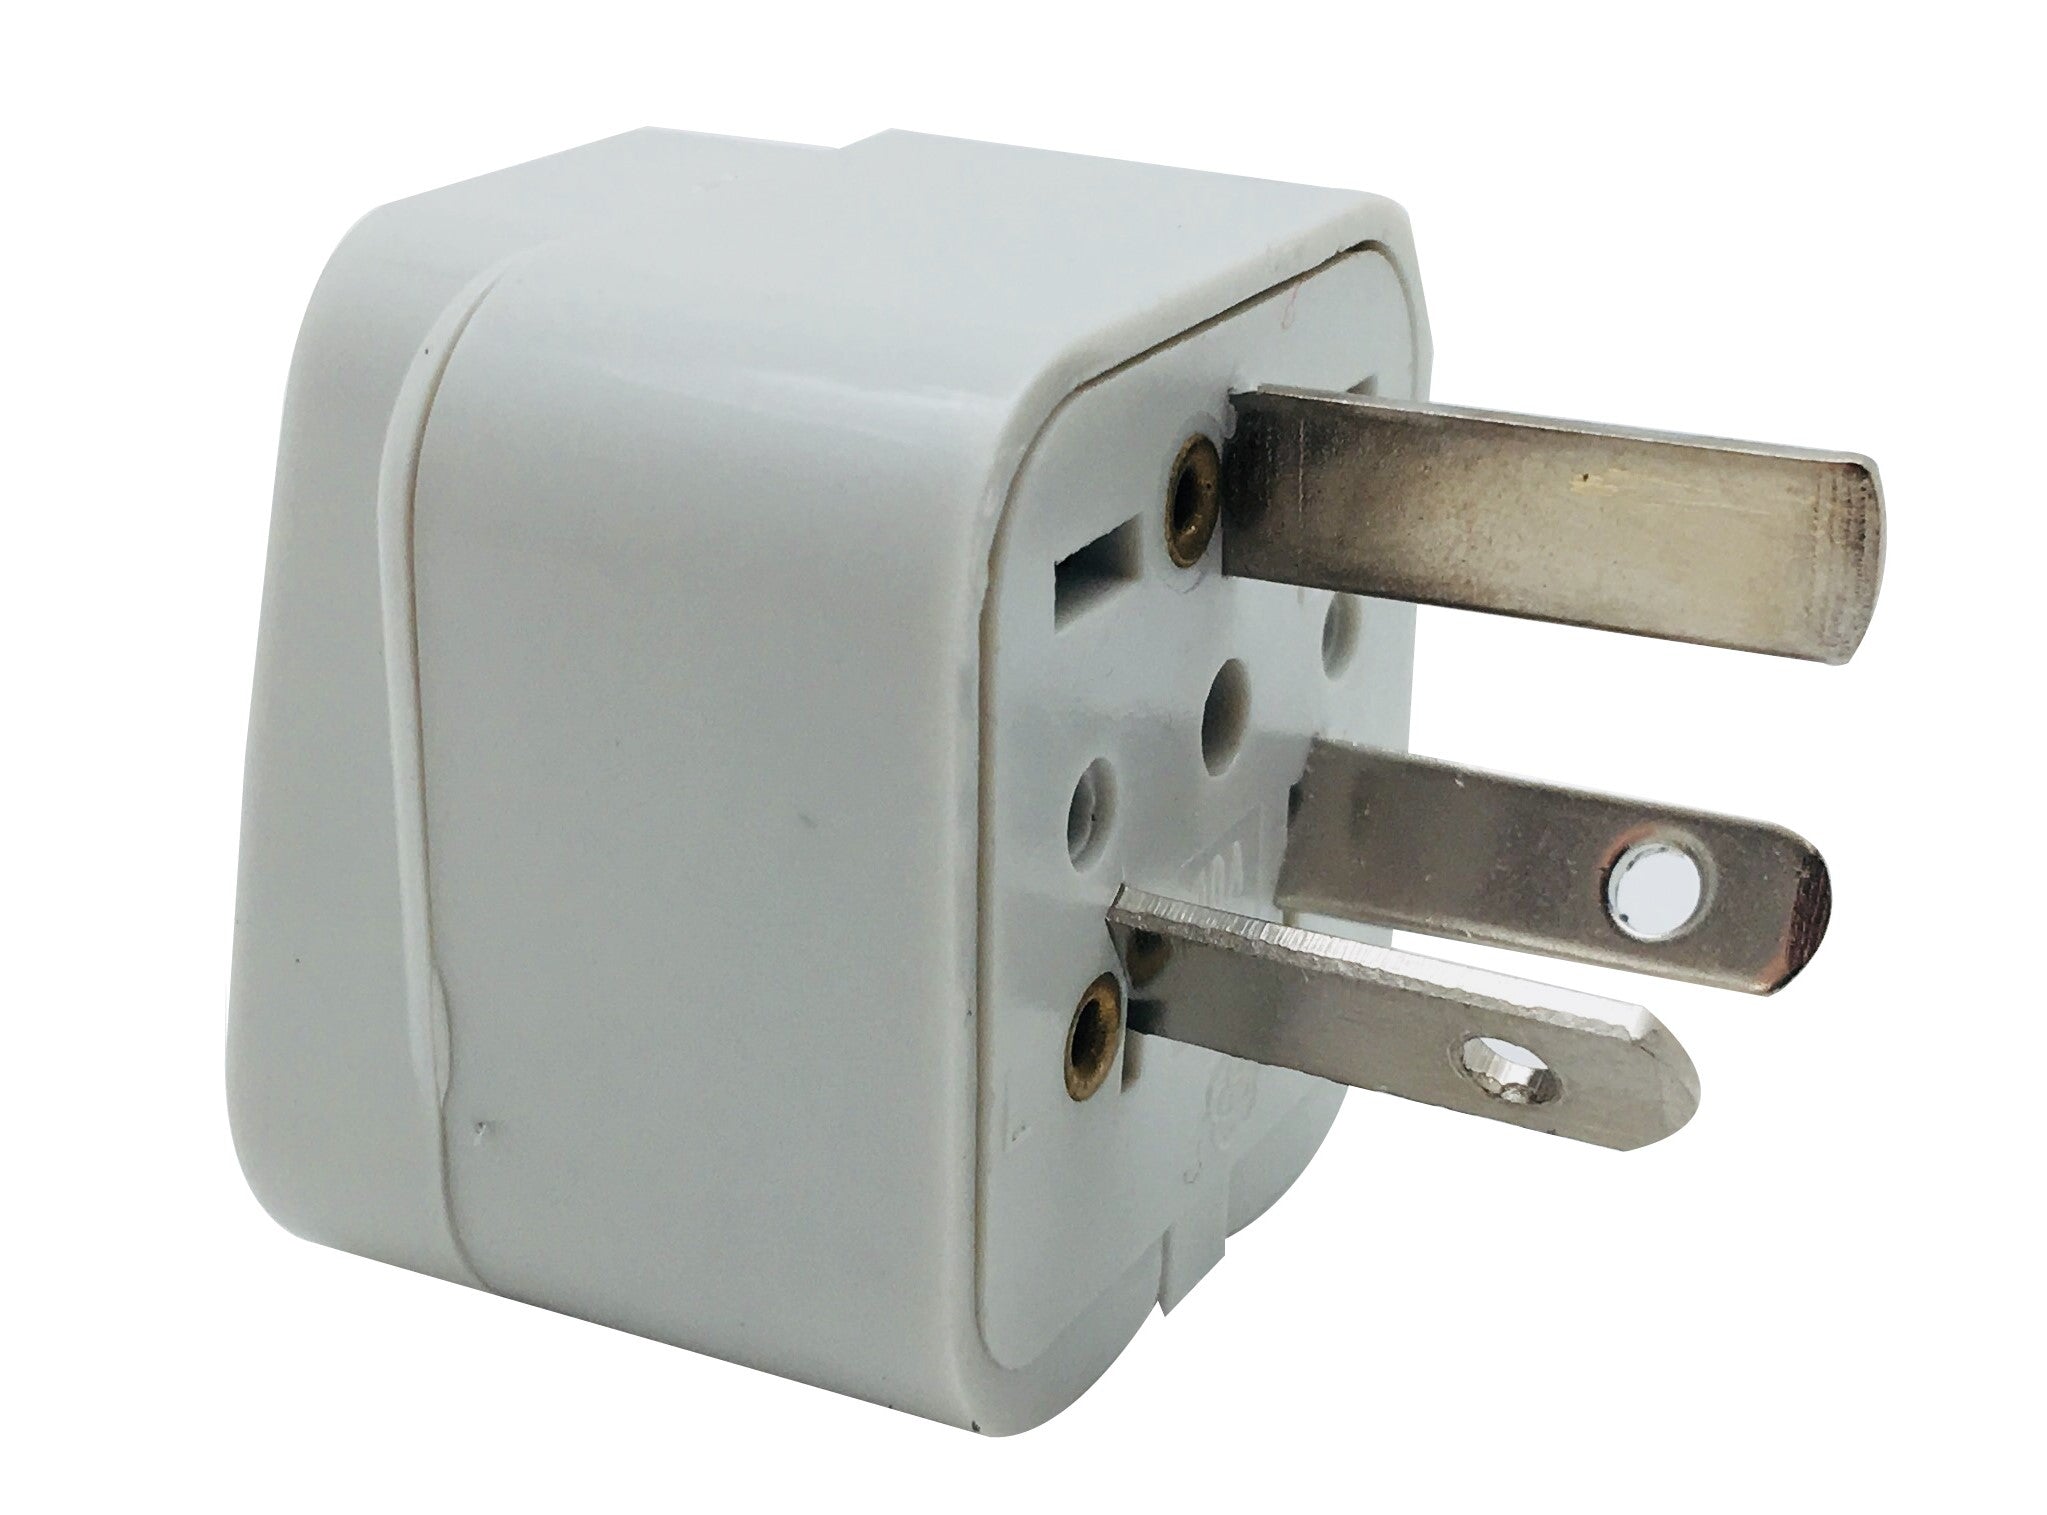 42-0303 Universal Power Plug Adapter: Oblique flat blade with ground